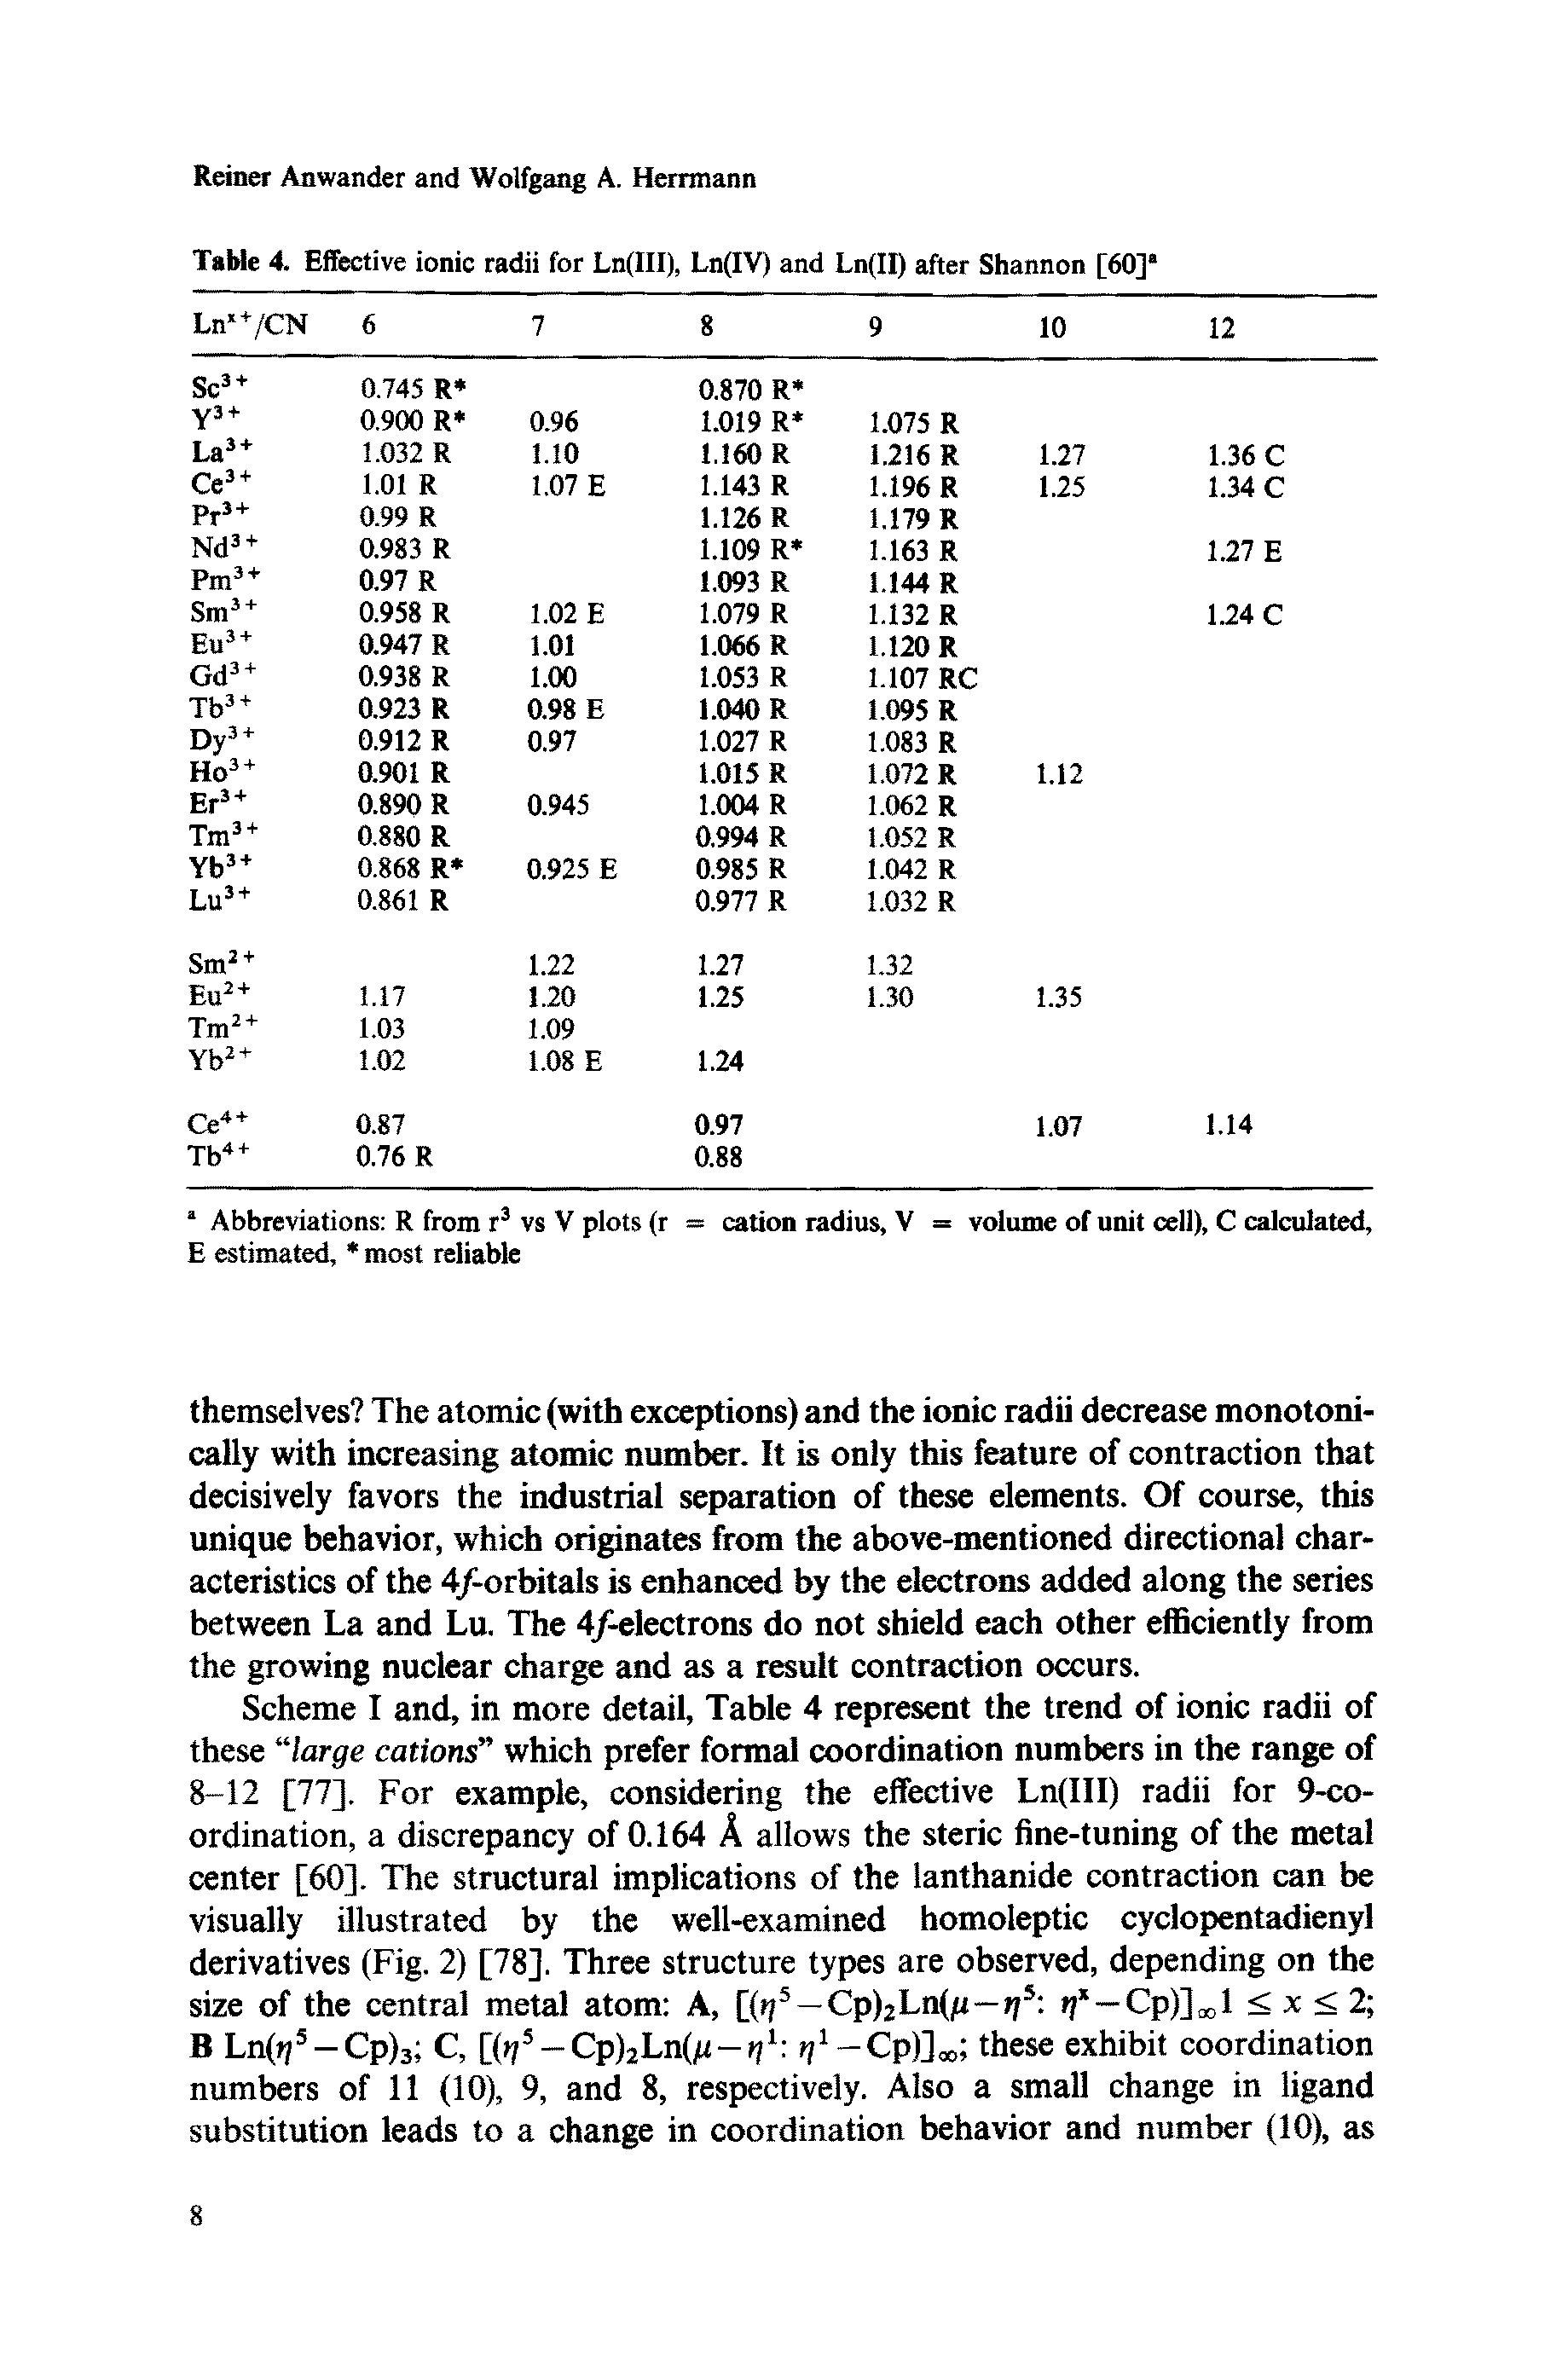 Scheme I and, in more detail, Table 4 represent the trend of ionic radii of these large cations which prefer formal coordination numbers in the range of 8-12 [77]. For example, considering the effective Ln(III) radii for 9-co-ordination, a discrepancy of 0.164 A allows the steric fine-tuning of the metal center [60]. The structural implications of the lanthanide contraction can be visually illustrated by the well-examined homoleptic cyclopentadienyl derivatives (Fig. 2) [78], Three structure types are observed, depending on the size of the central metal atom A, [( j5—Cp)2Ln(ji— 5 rf — Cp)] x, 1 < % < 2 B Ln(fj5 —Cp)3 C, [fo -CpJjLnCi- 1 ff1—Cp)], these exhibit coordination numbers of 11 (10), 9, and 8, respectively. Also a small change in ligand substitution leads to a change in coordination behavior and number (10), as...